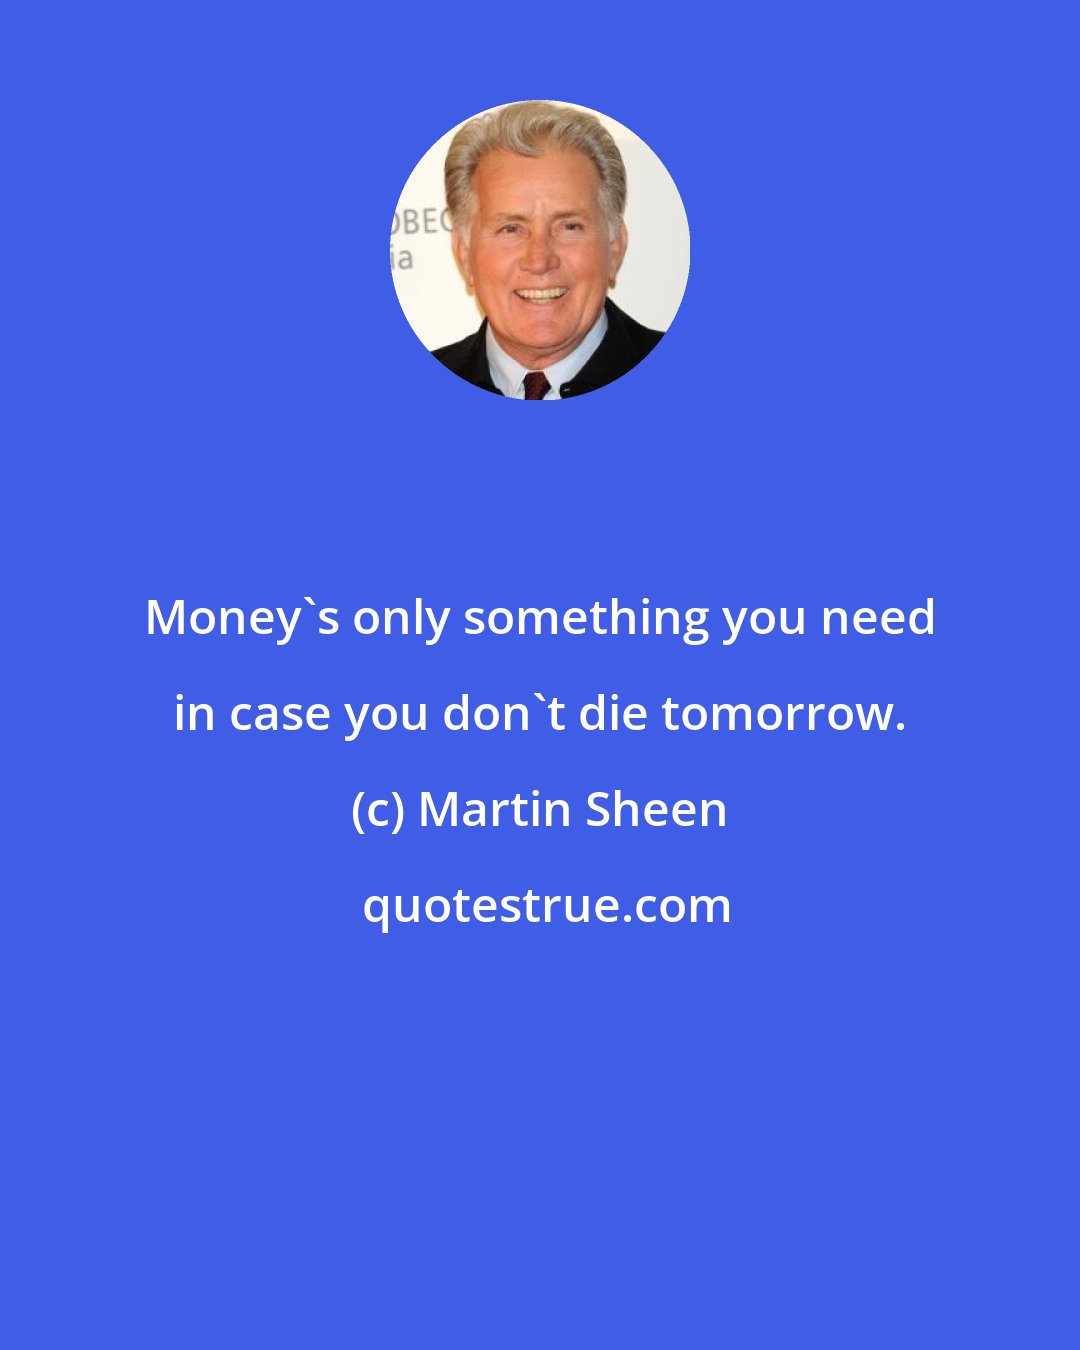 Martin Sheen: Money's only something you need in case you don't die tomorrow.